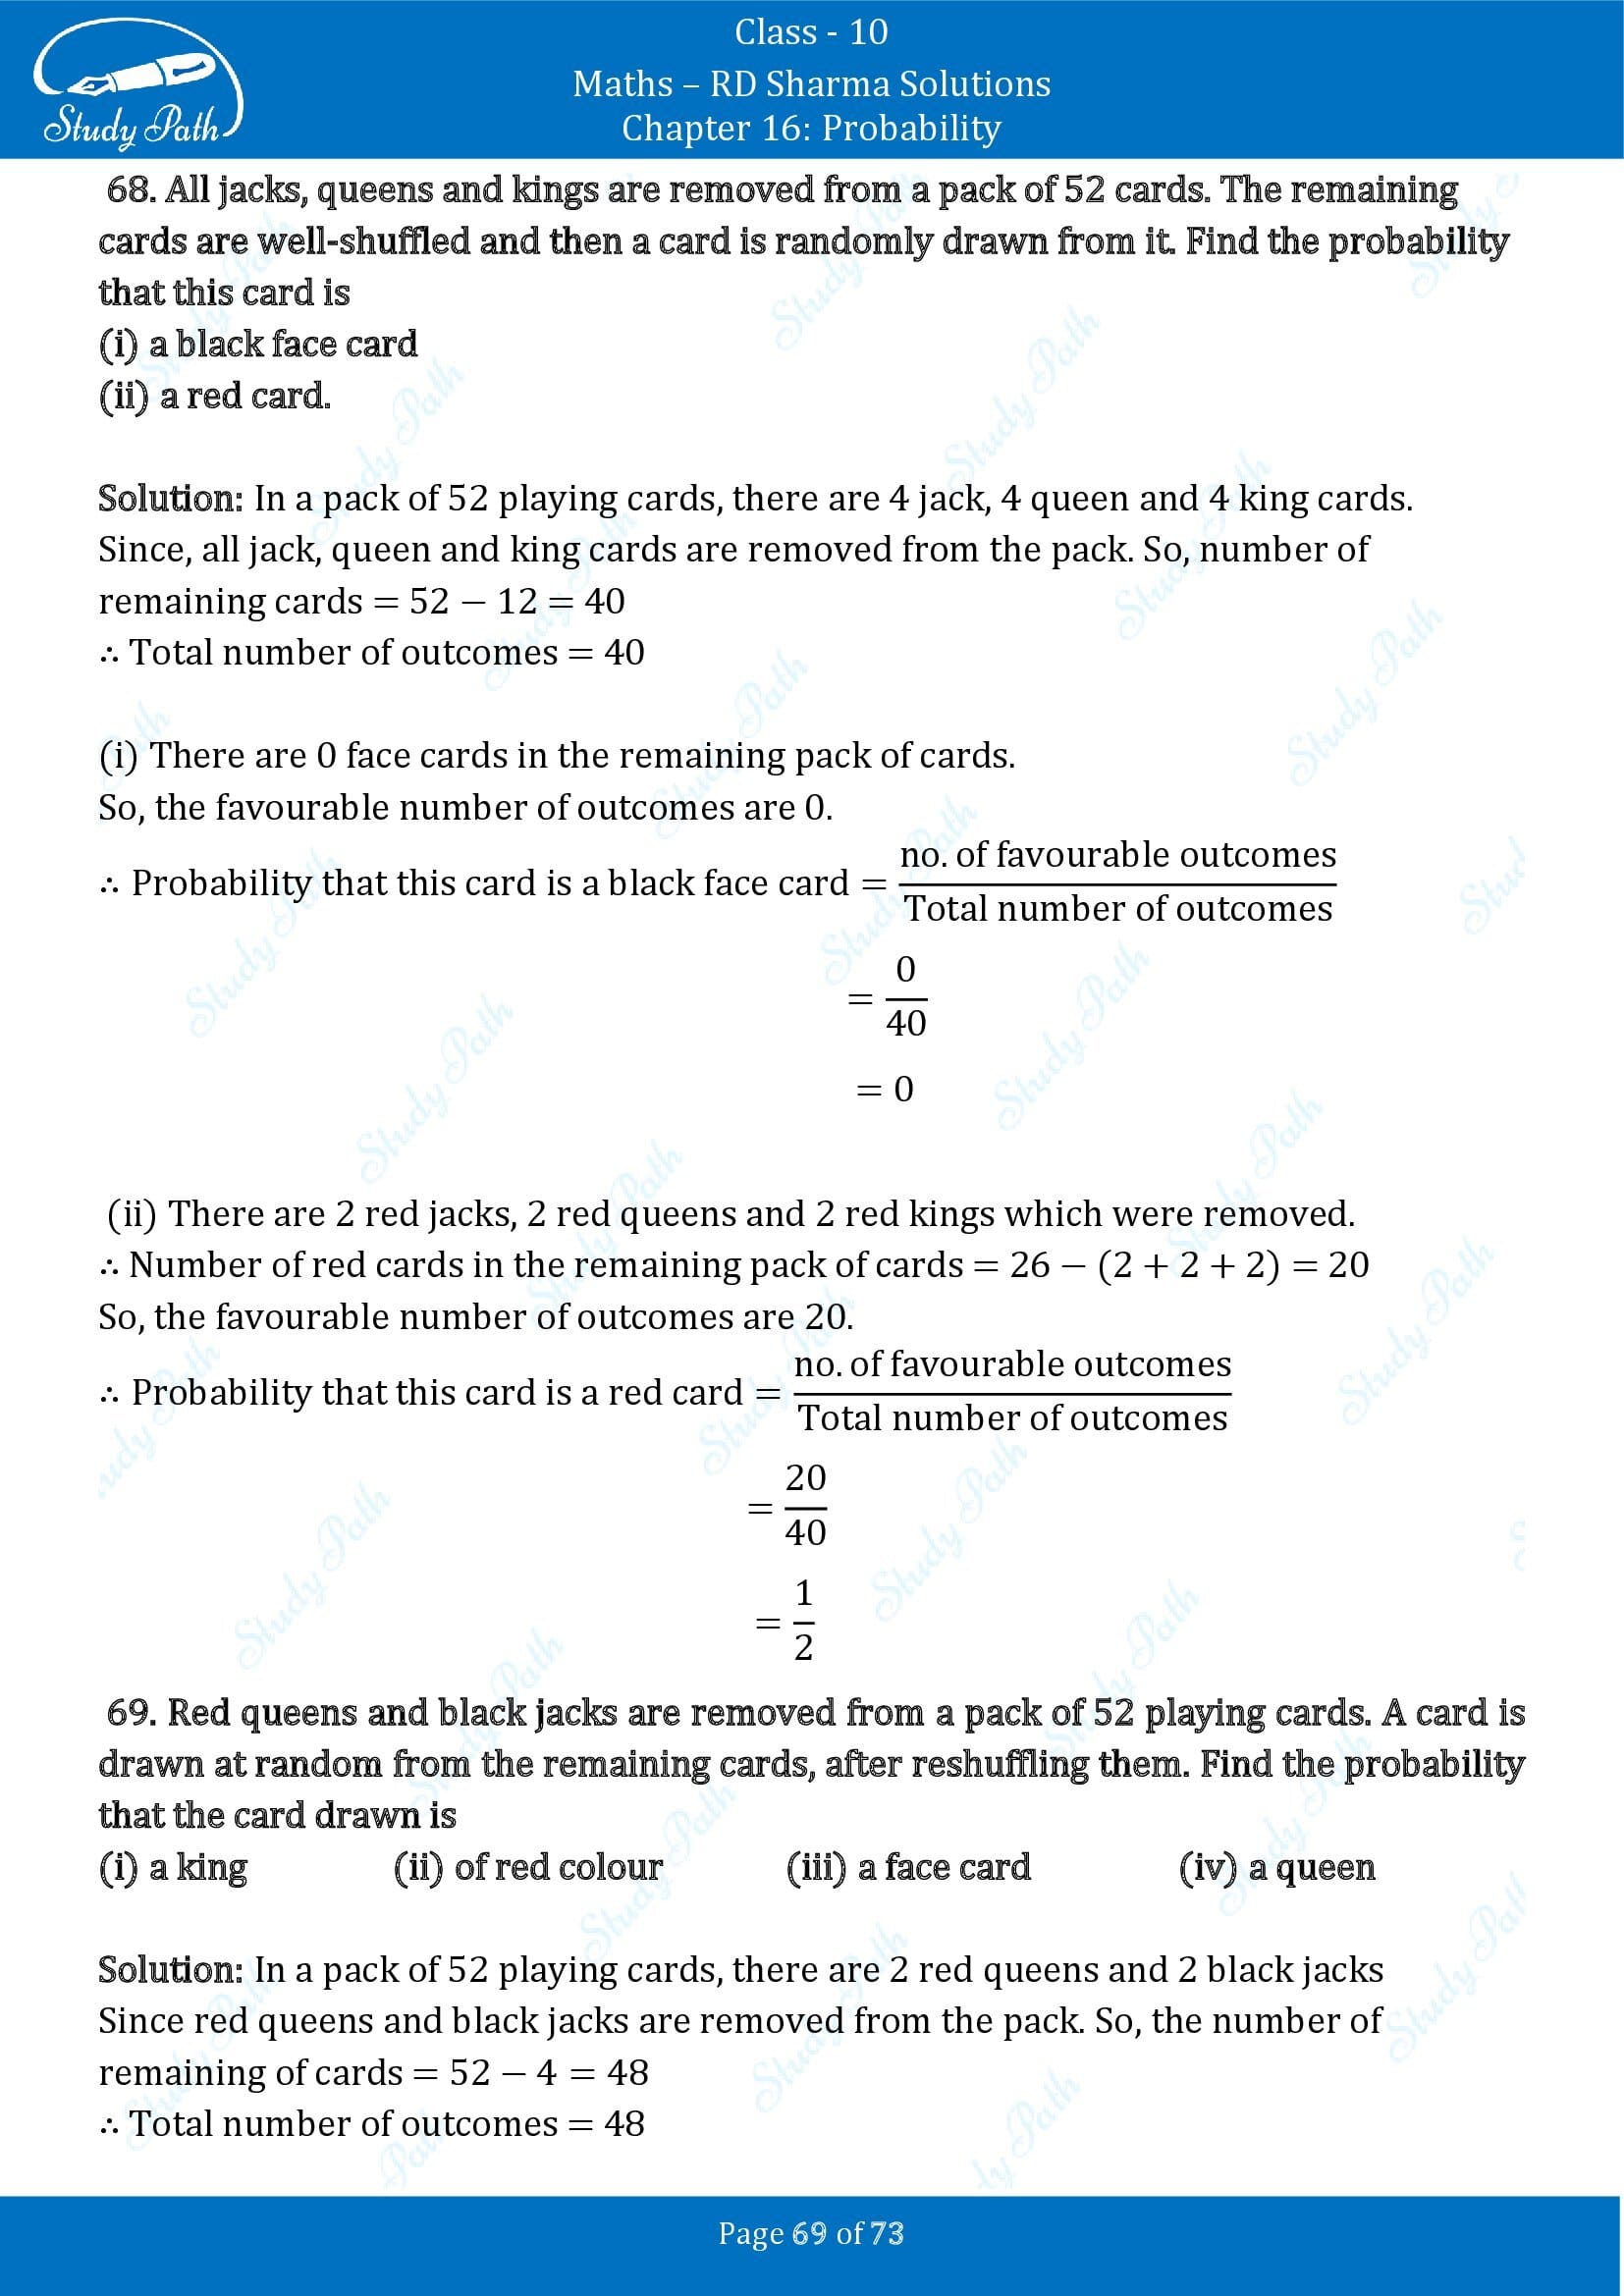 RD Sharma Solutions Class 10 Chapter 16 Probability Exercise 16.1 00069